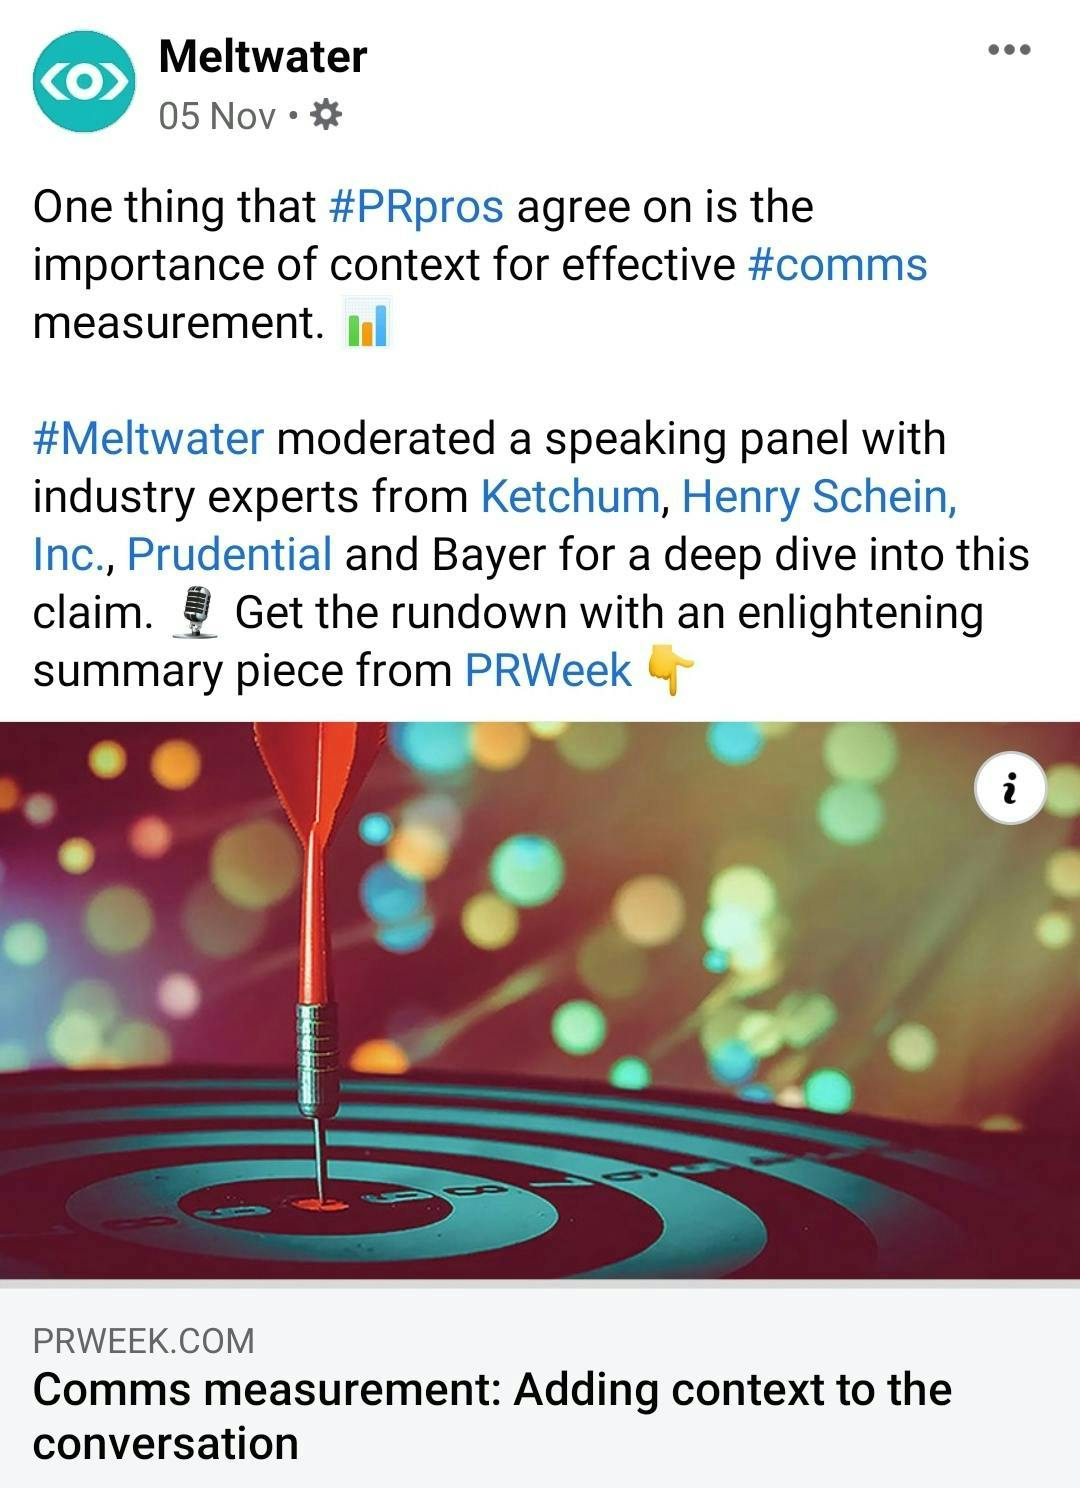 Screenshot of a post from Meltwater's facebook business page